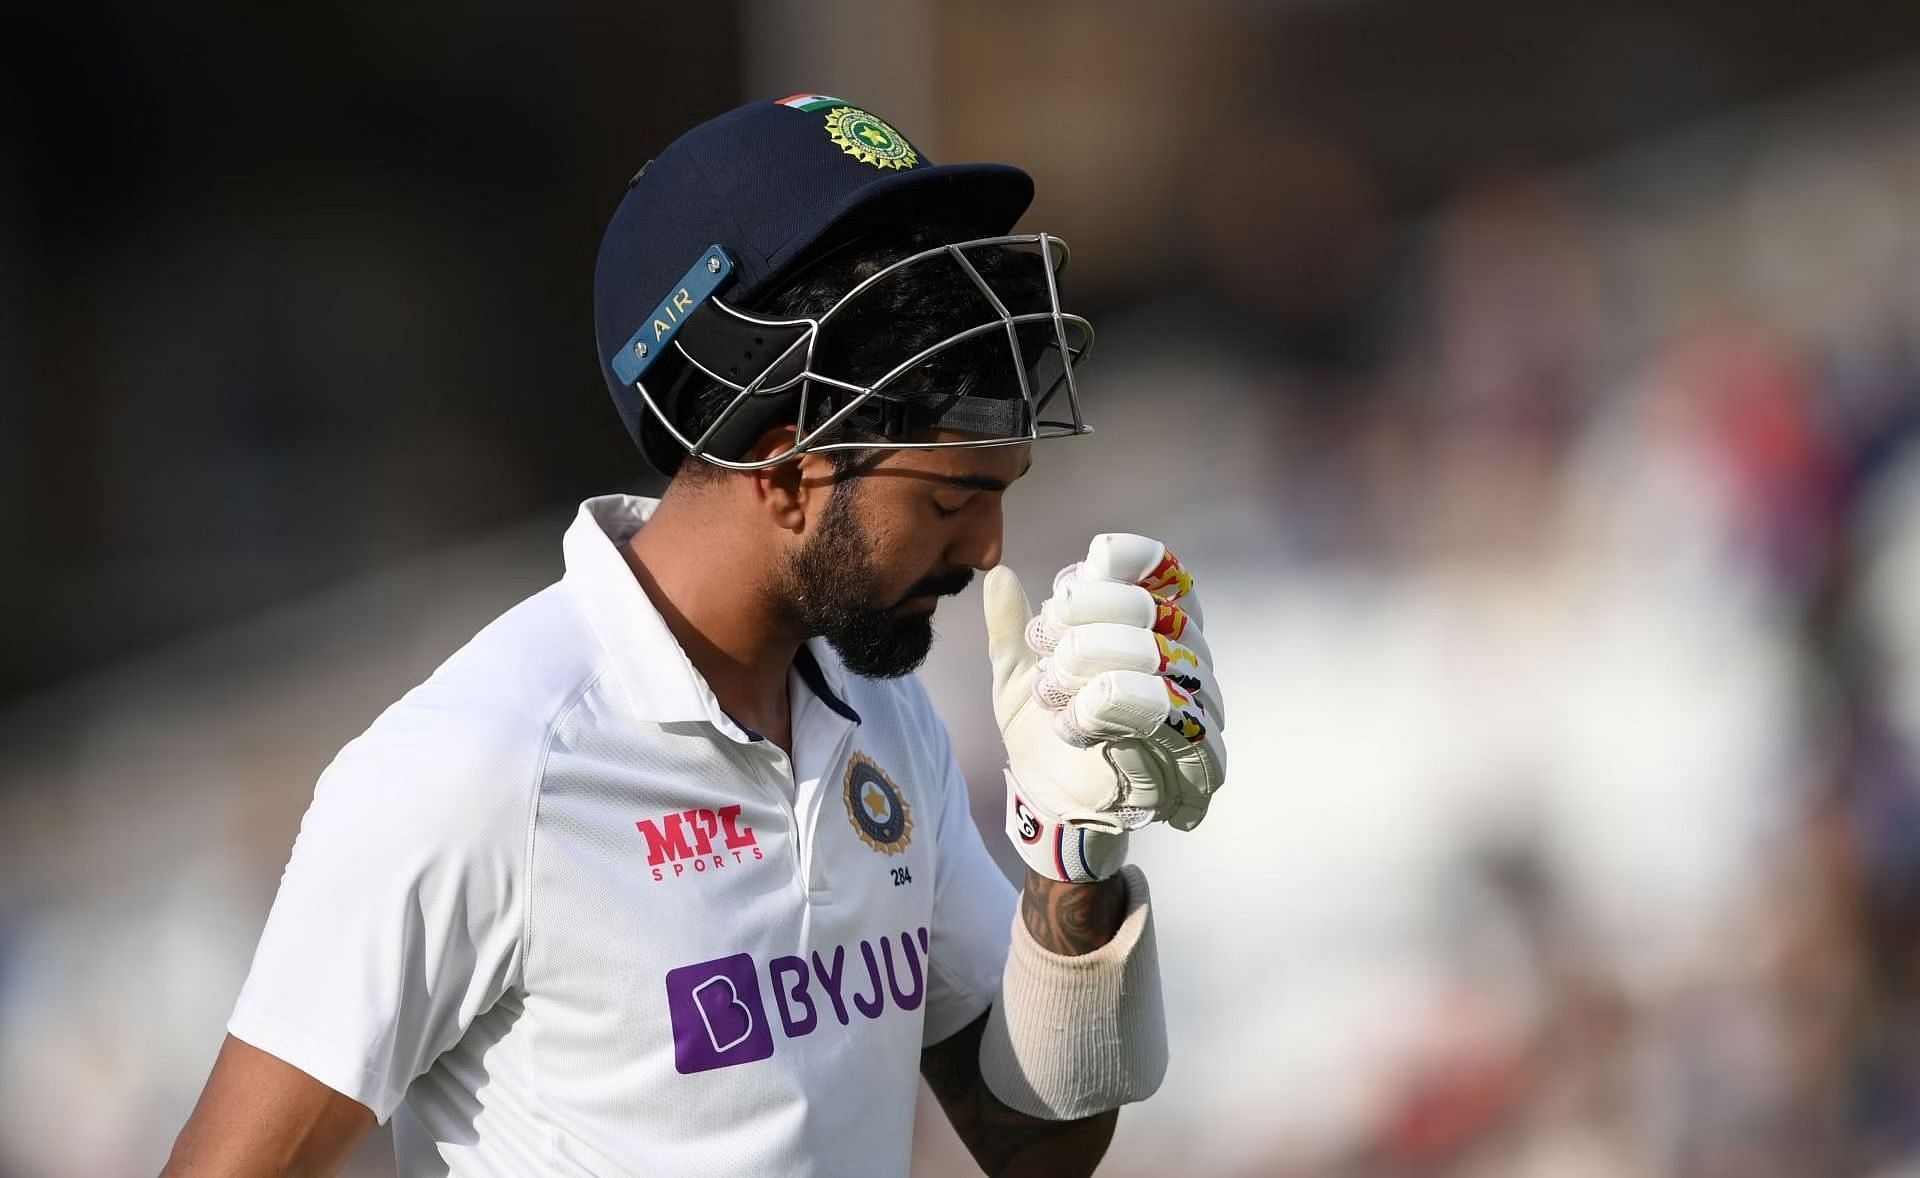 KL Rahul was the first Indian batter to be dismissed.